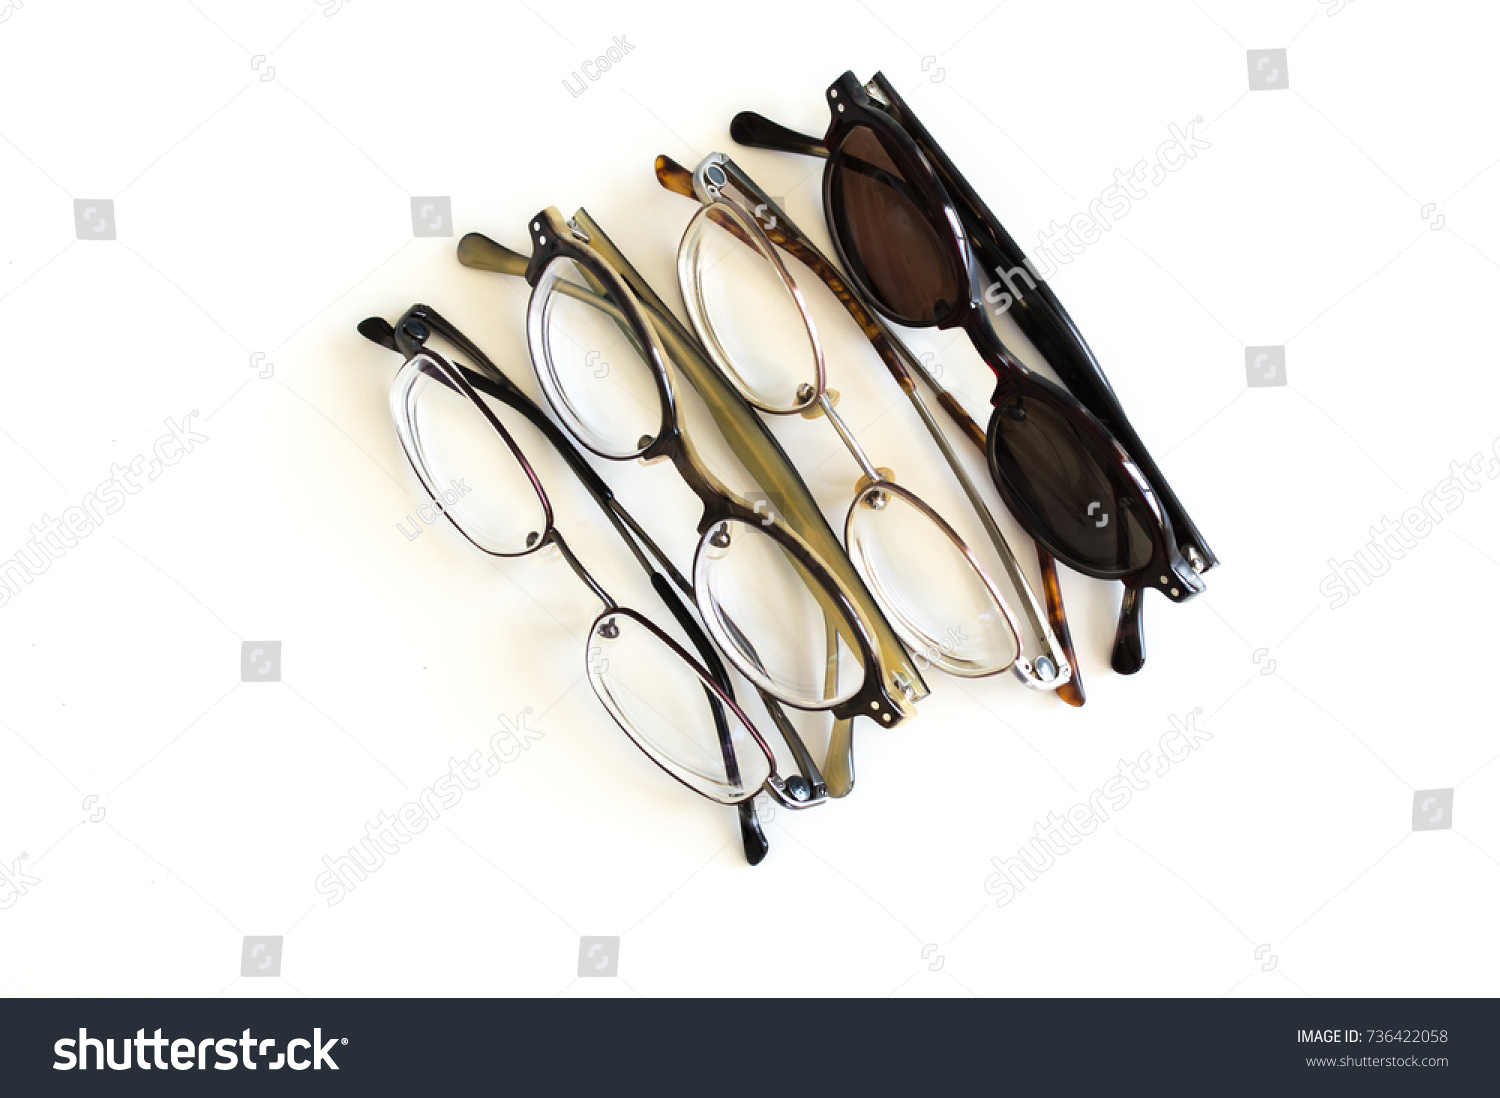 3 pairs of stylish eyeglasses and 1 pair of sunglasses in a row isolated on white #736422058